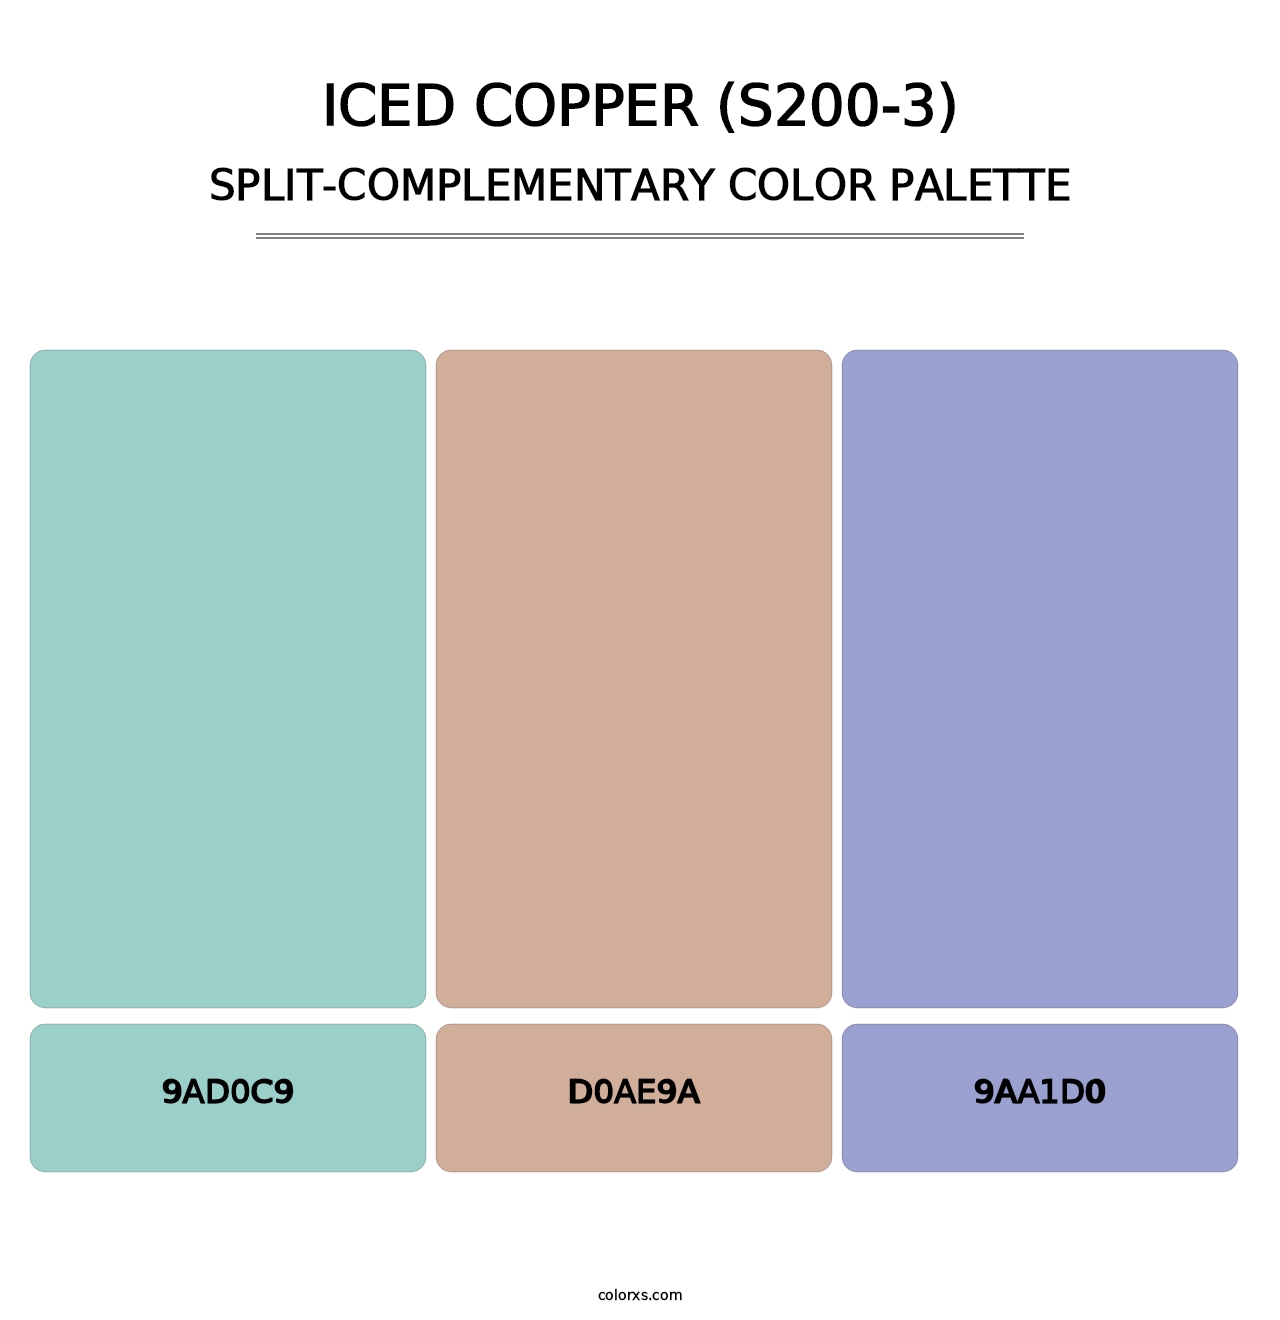 Iced Copper (S200-3) - Split-Complementary Color Palette